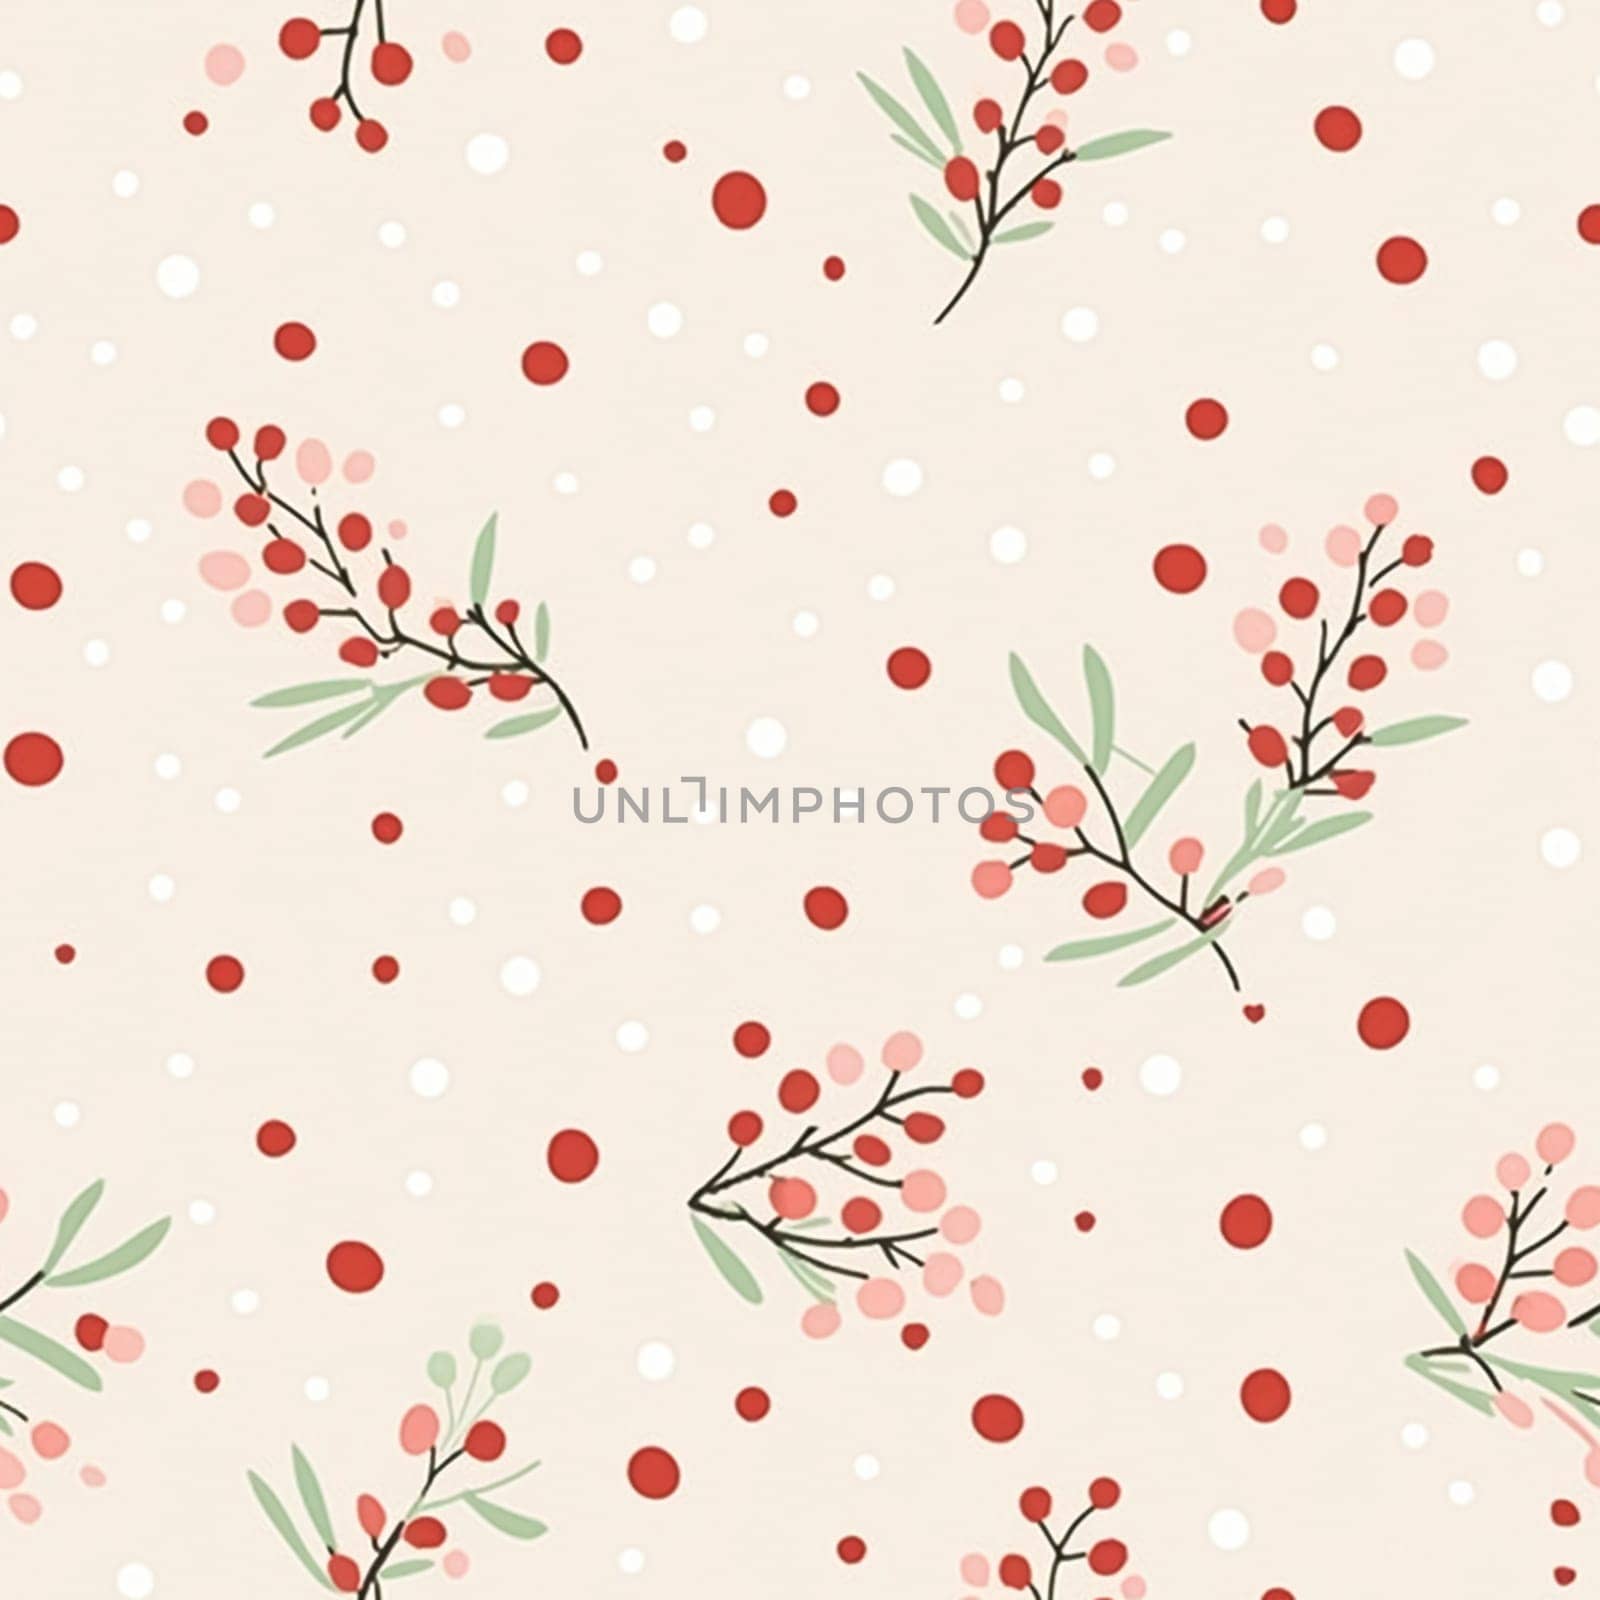 Seamless pattern, tileable modern botanical Christmas holiday, country berry dots print for wallpaper, wrapping paper, scrapbook, fabric and product design motif